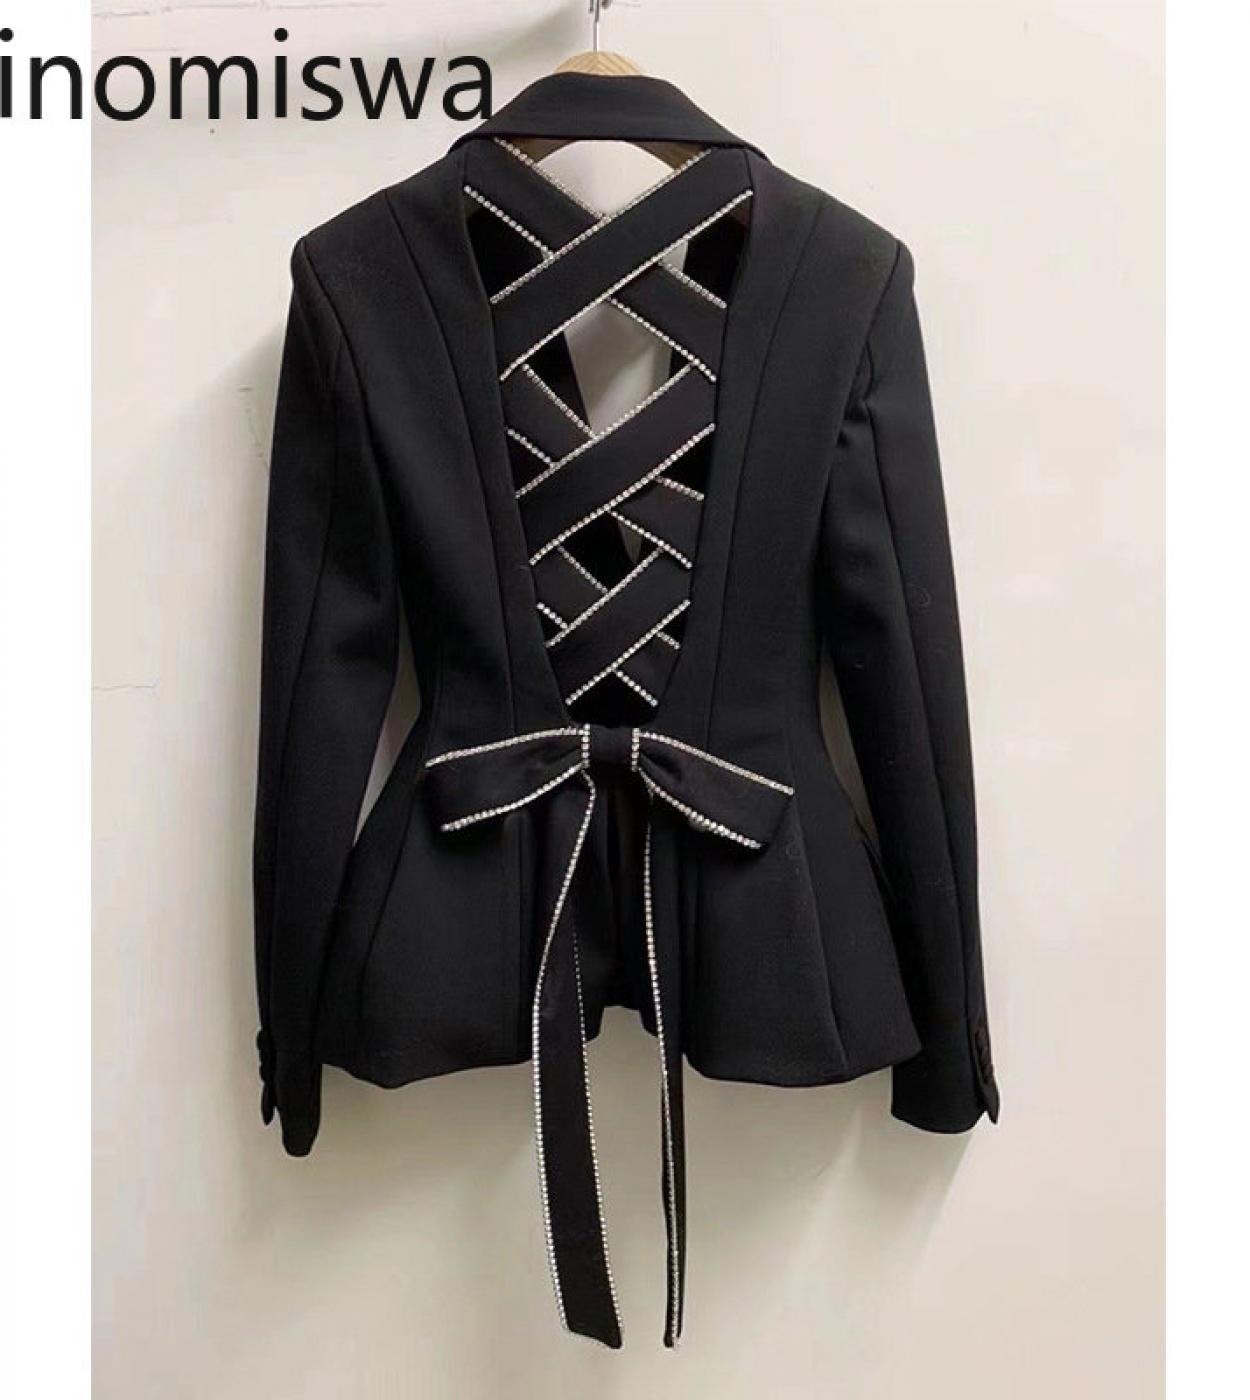 Tinomiswa Bandage Backless  Blazers Women Notched Long Sleeve Single Breasted Blazers Solid Color Casual Fashion Suits H